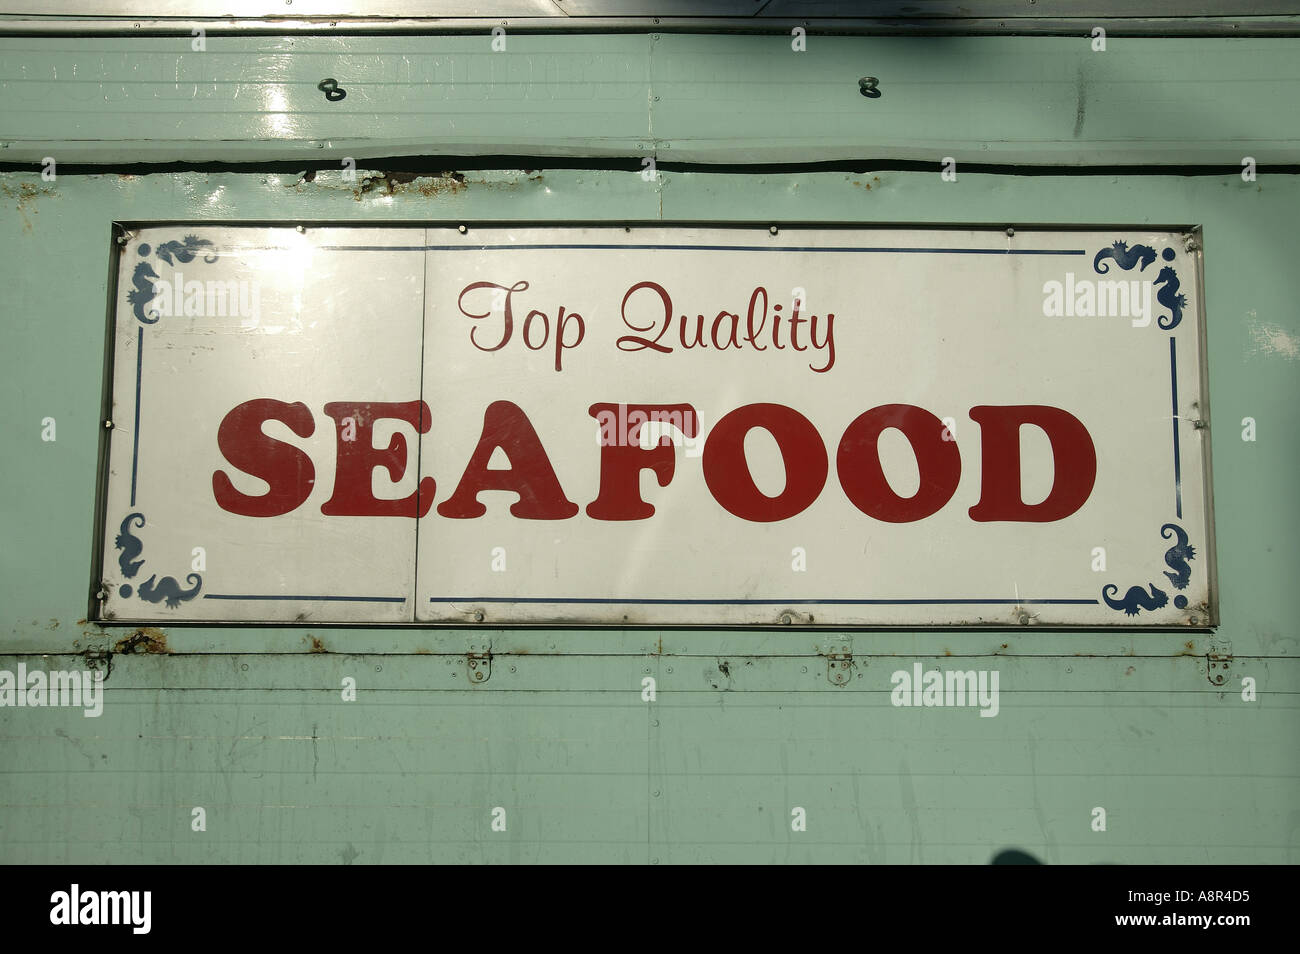 Top Quality Seafood sign Stock Photo